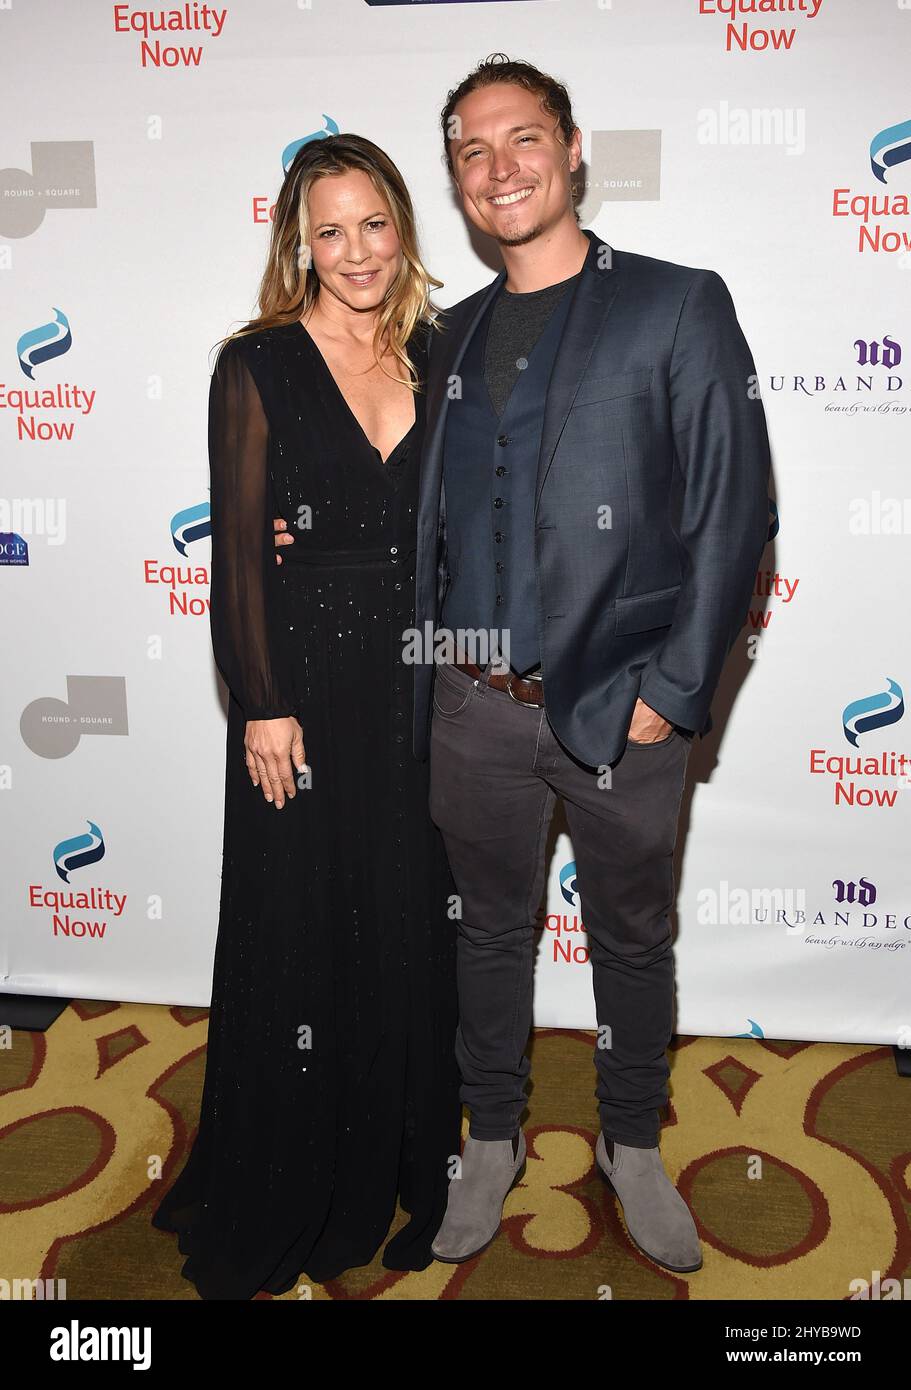 Maria Bello and Elijah-Allan Blitz arrives the 3rd Annual 'Make Equality Reality' Gala at the Montage Hotel on Monday, Dec. 5, 2016, in Beverly Hills, California Stock Photo